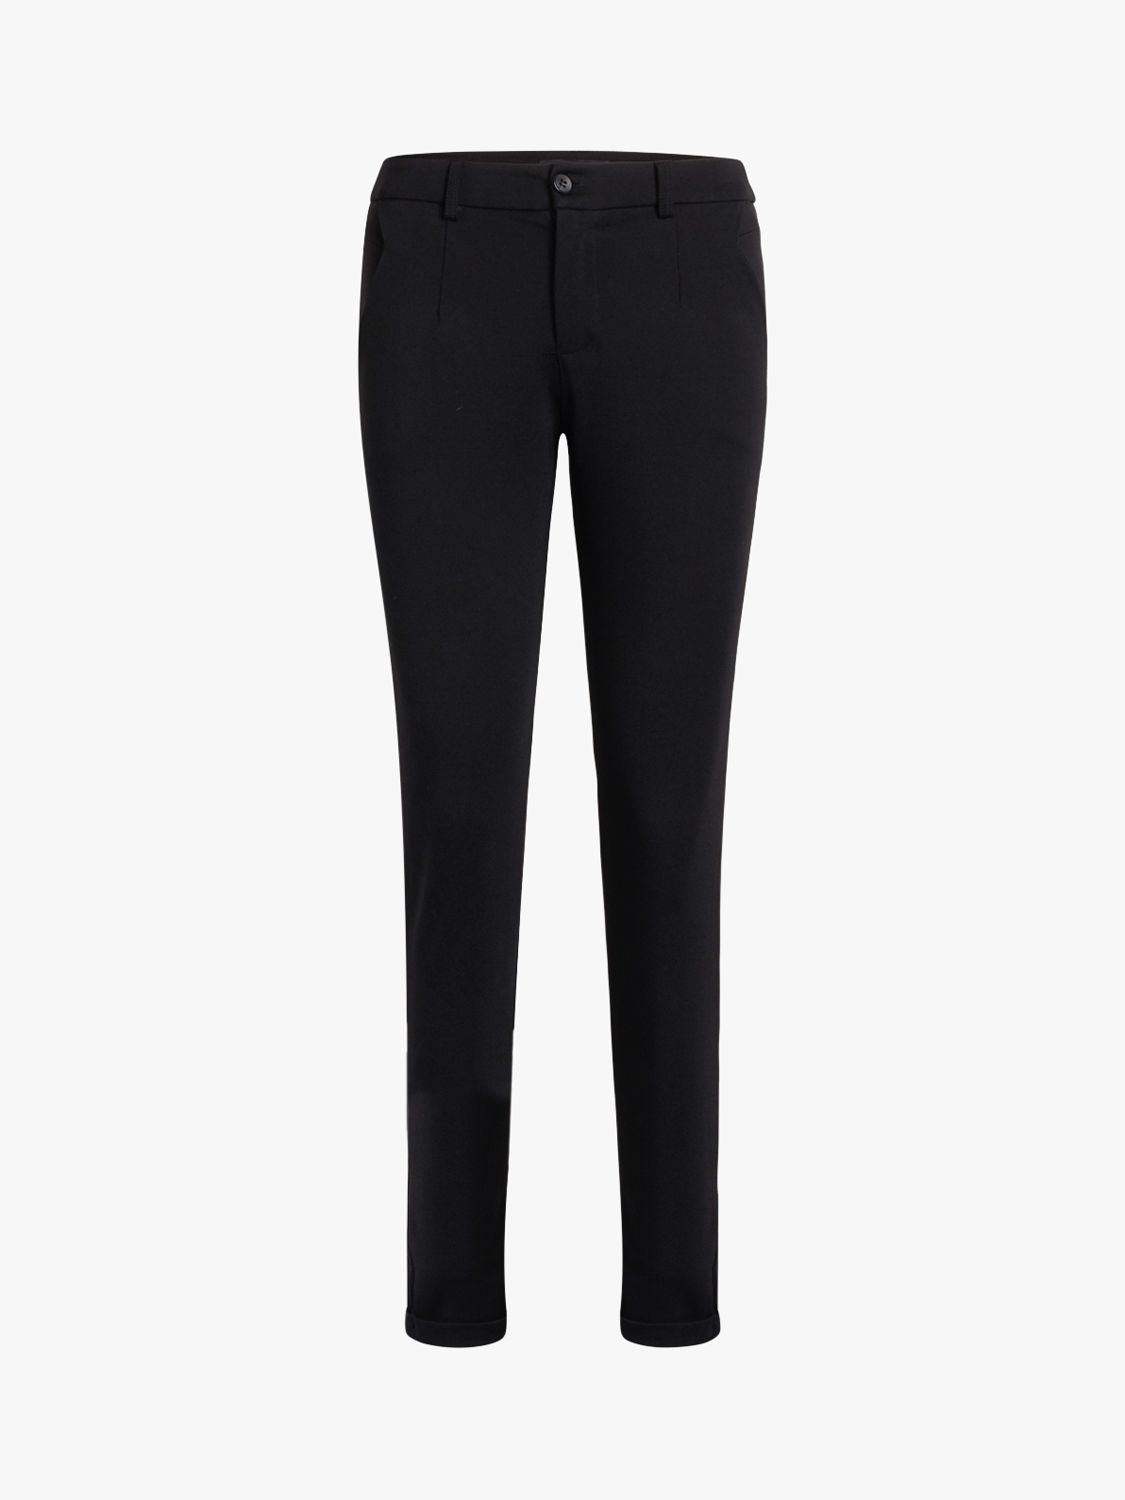 Sisters Point New George Classic Slim Fit Trousers, Black, XS